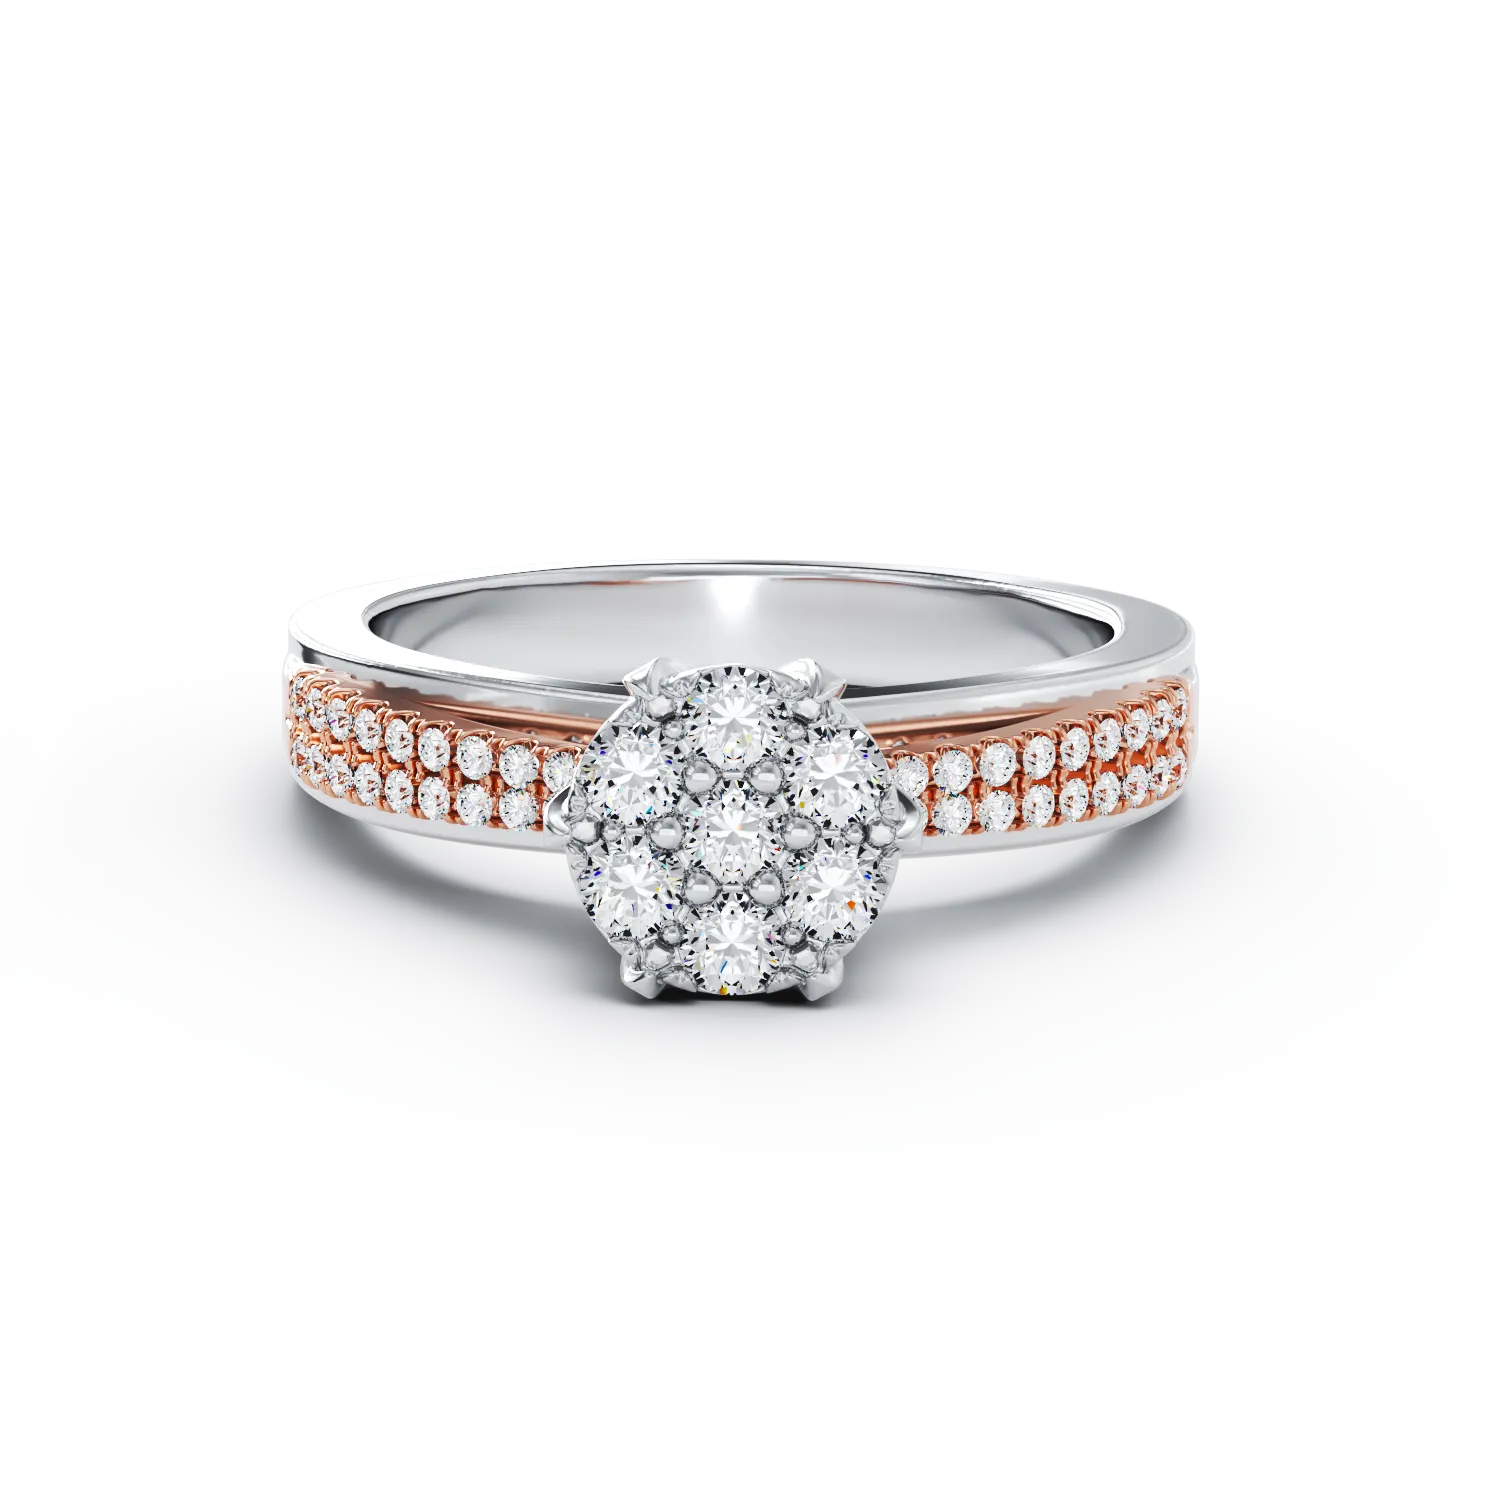 18K white-rose gold engagement ring with 0.36ct diamonds